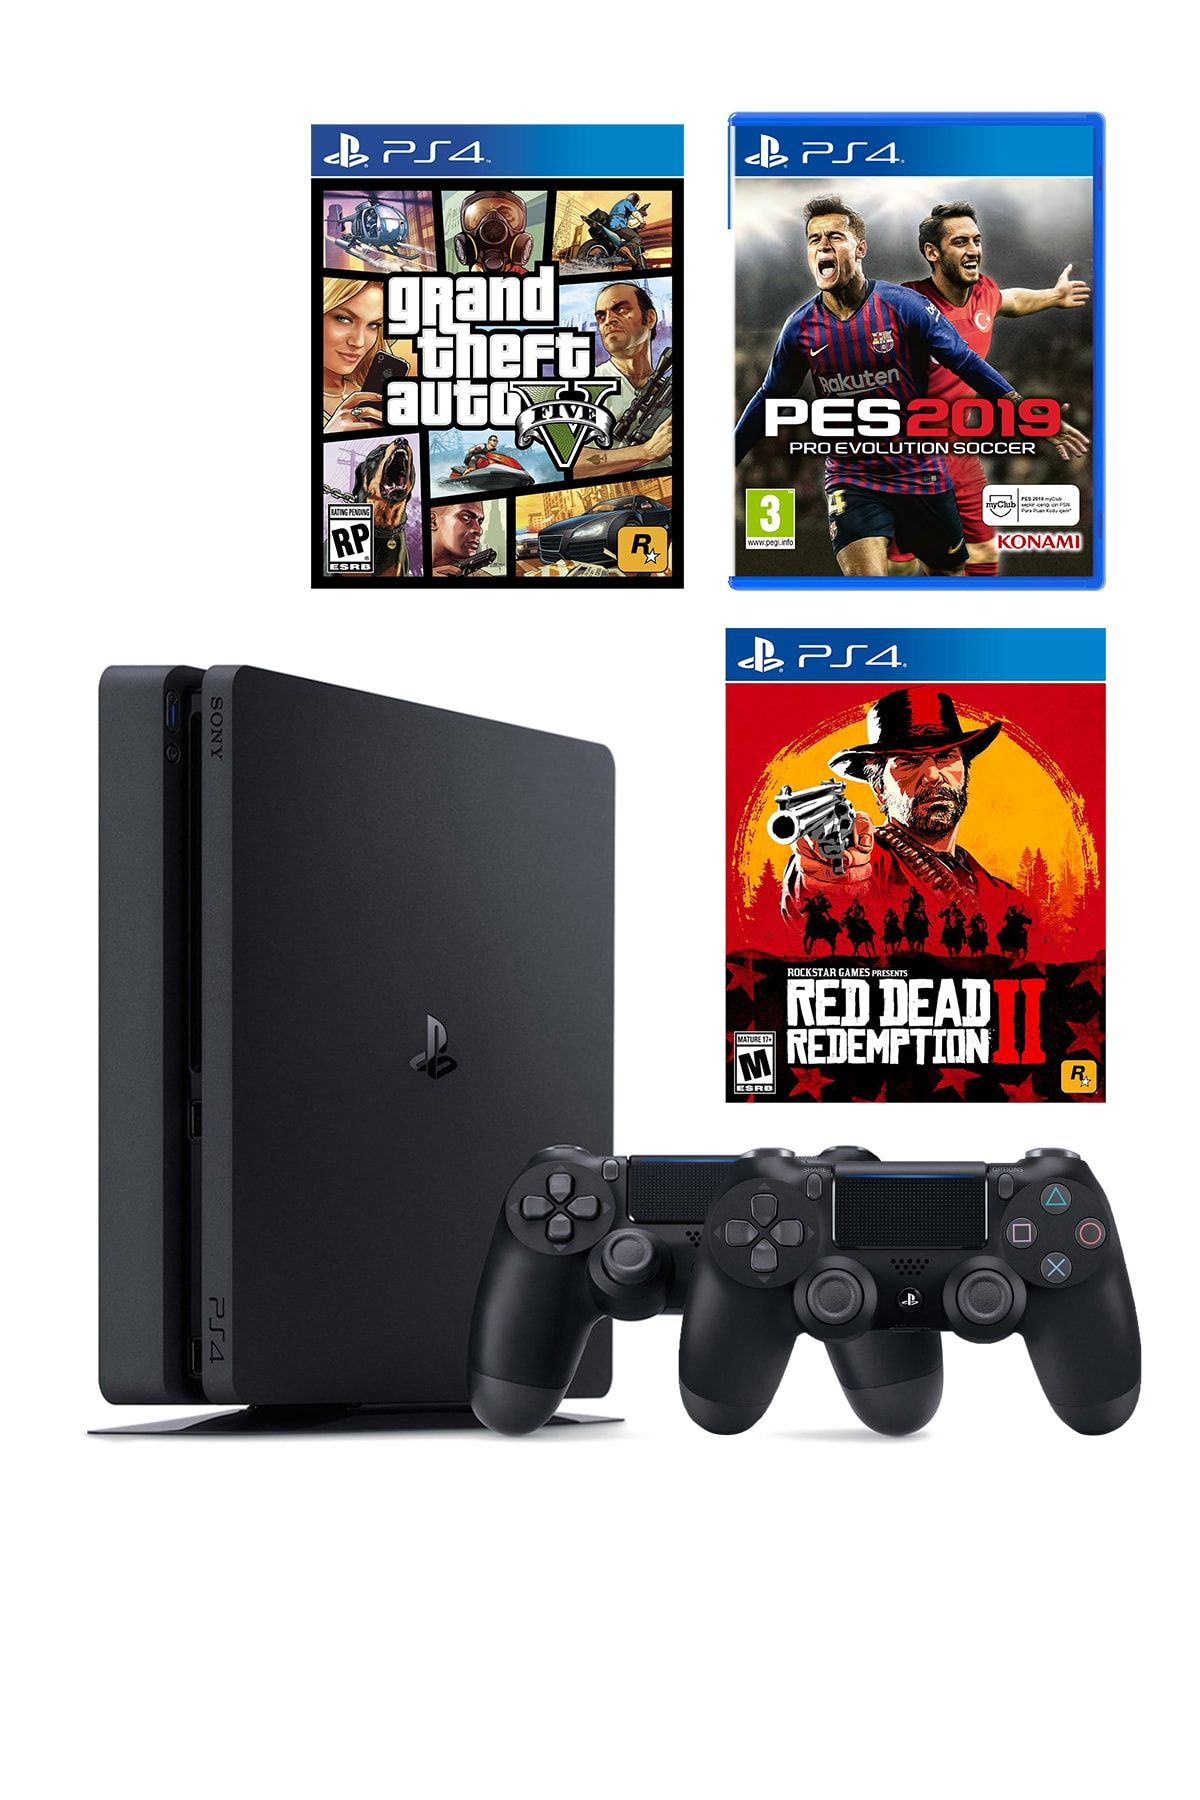 Sony Playstation 4 Slim 1 TB + 2. PS4 Kol + PS4 GTA 5 + Pes 19 + Red Dead Redemption 2